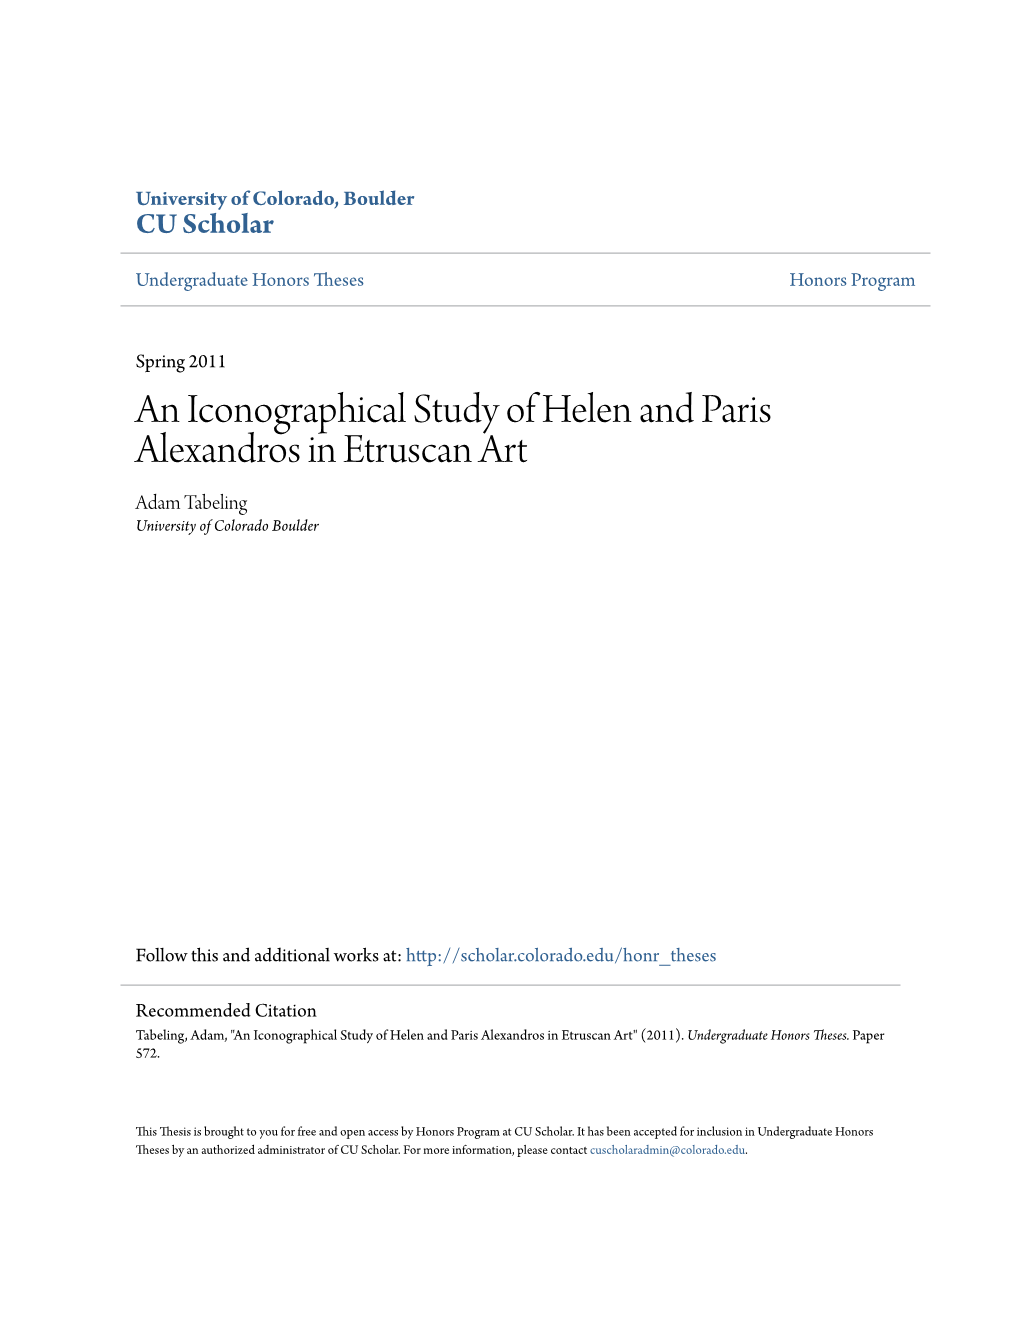 An Iconographical Study of Helen and Paris Alexandros in Etruscan Art Adam Tabeling University of Colorado Boulder